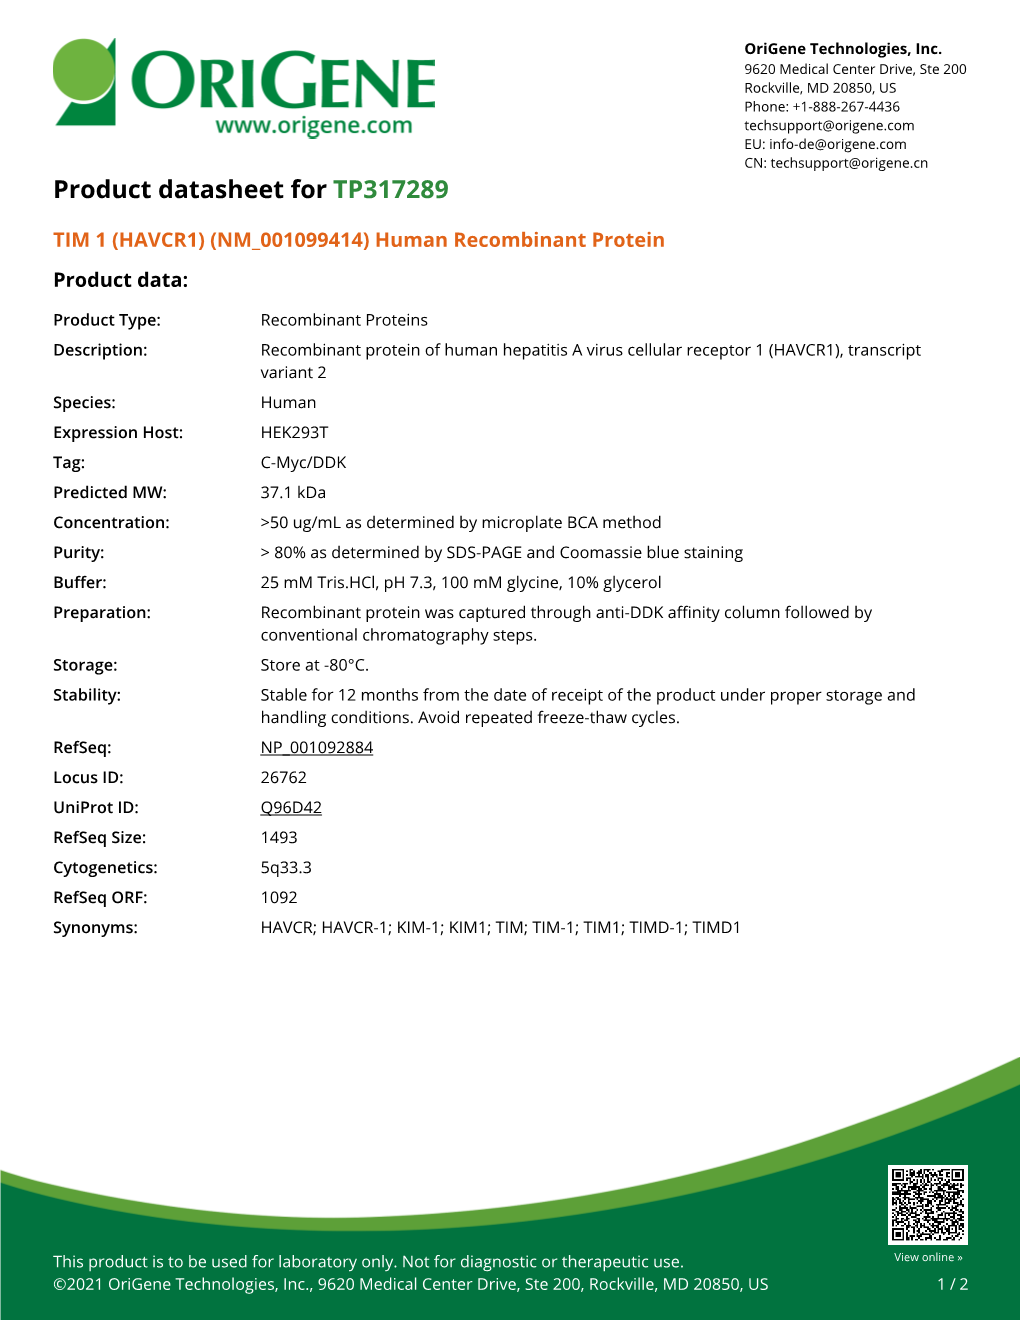 TIM 1 (HAVCR1) (NM 001099414) Human Recombinant Protein Product Data